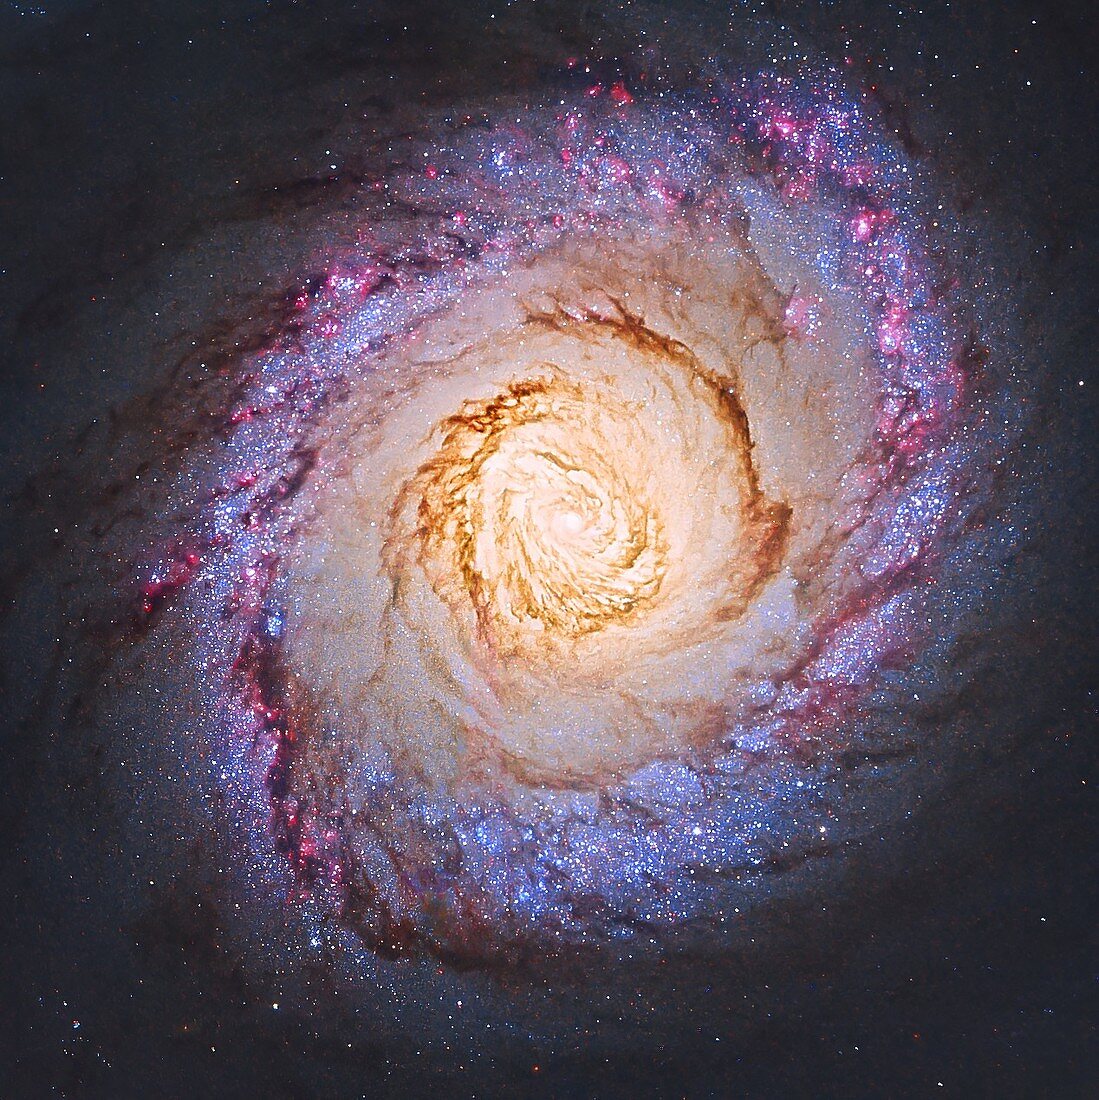 Ring of fire in M94 galaxy, Hubble Space Telescope image